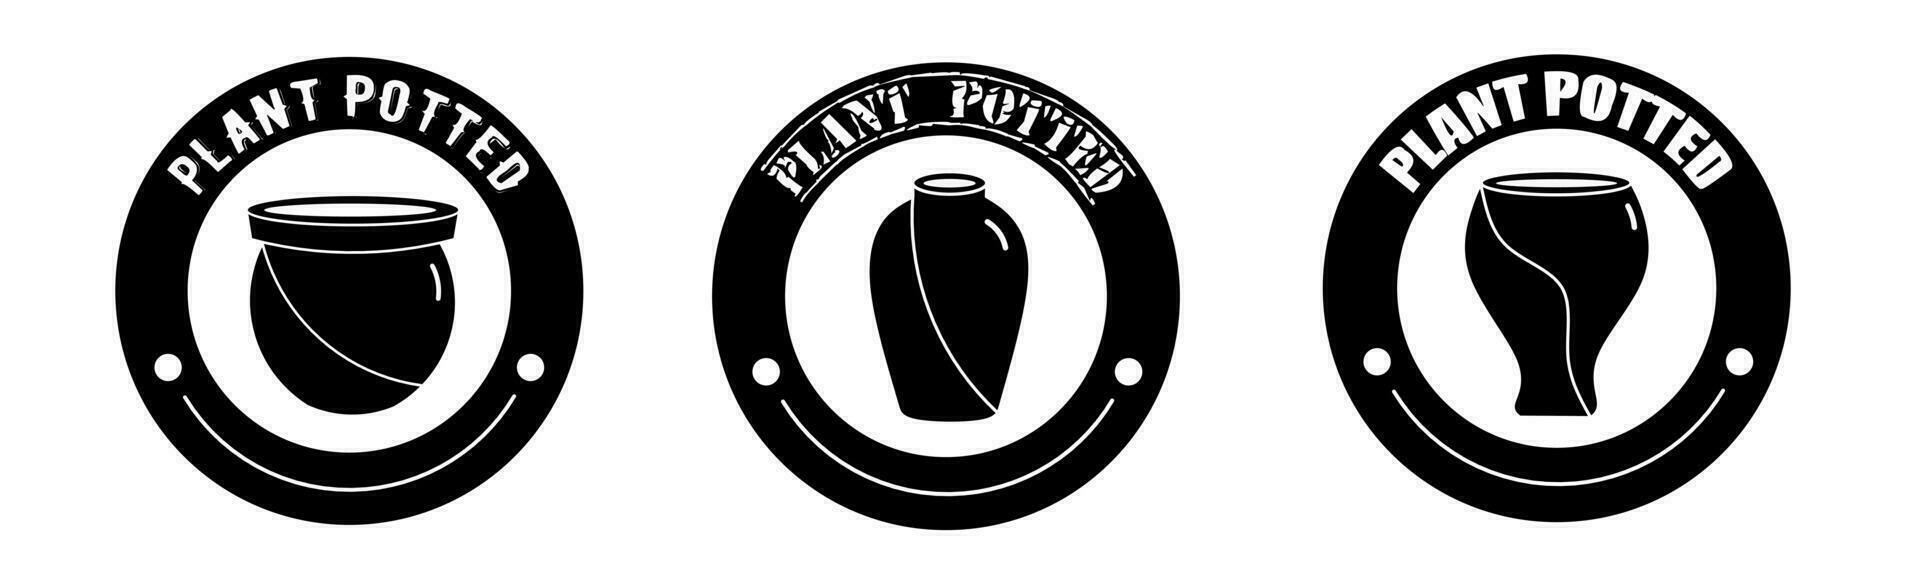 Plant potted product sale icon vector illustration. Design for shop and sale banner business.